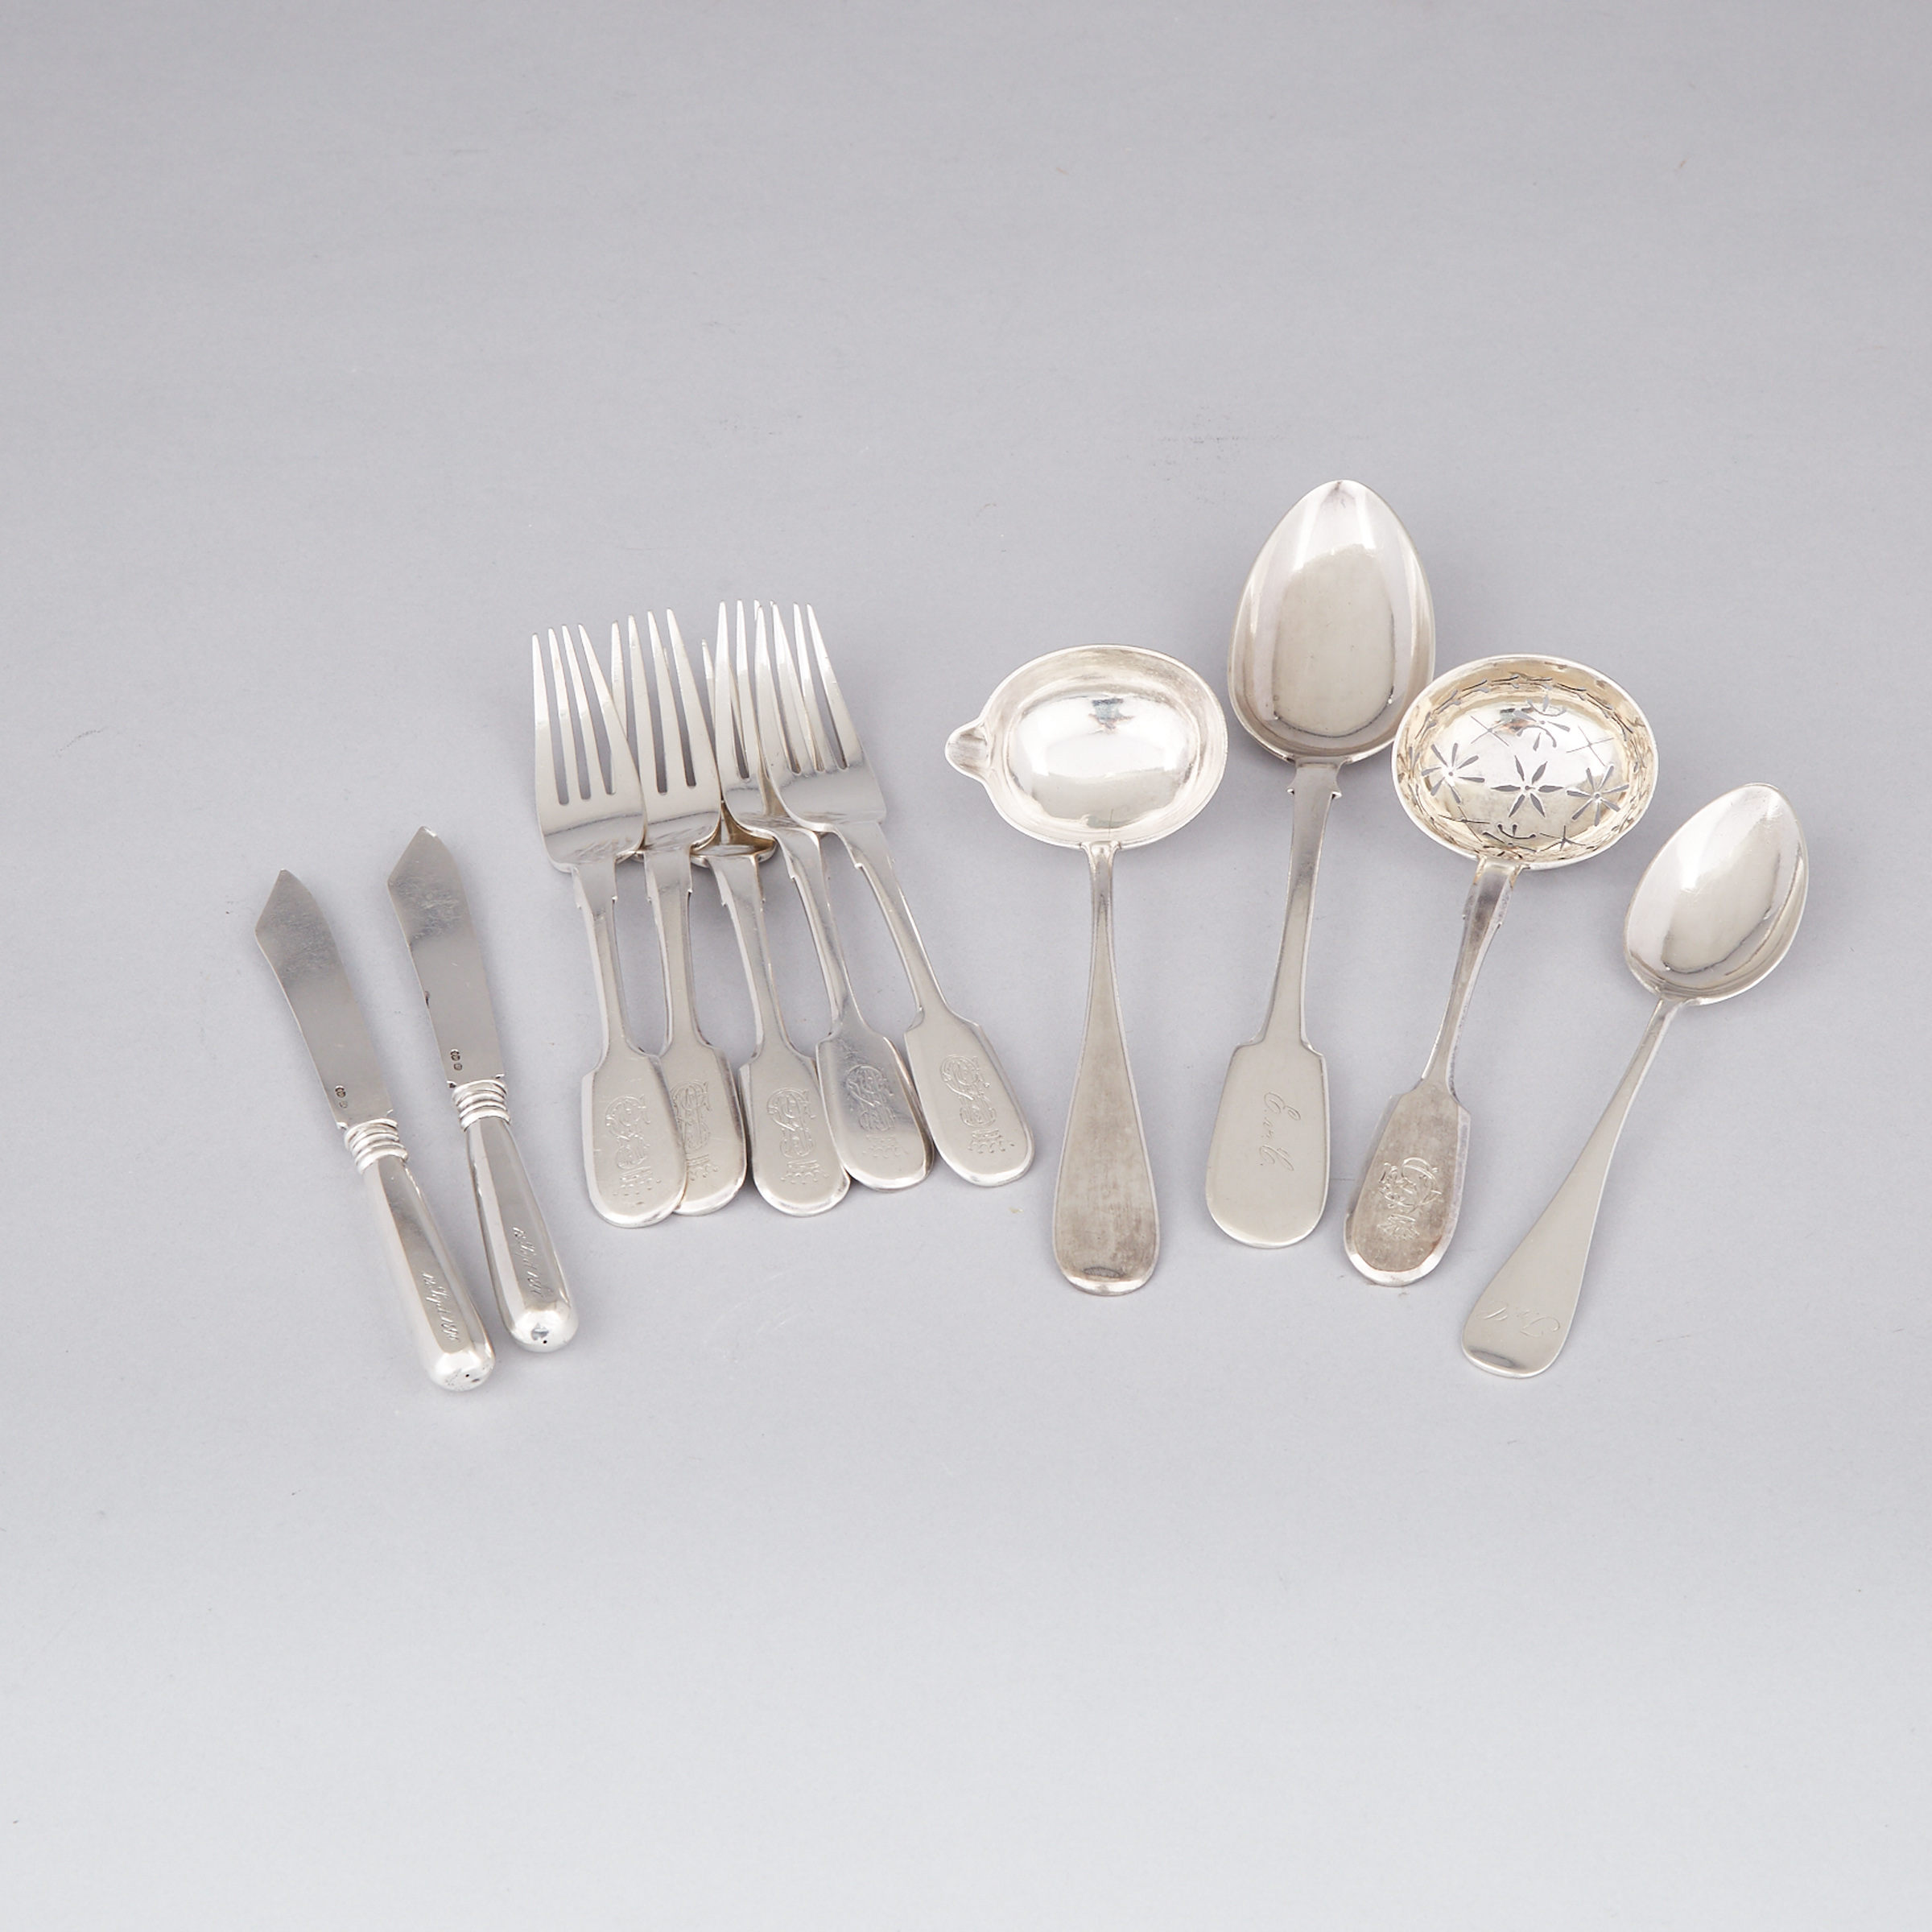 Small Group of Russian Silver Flatware, 19th century